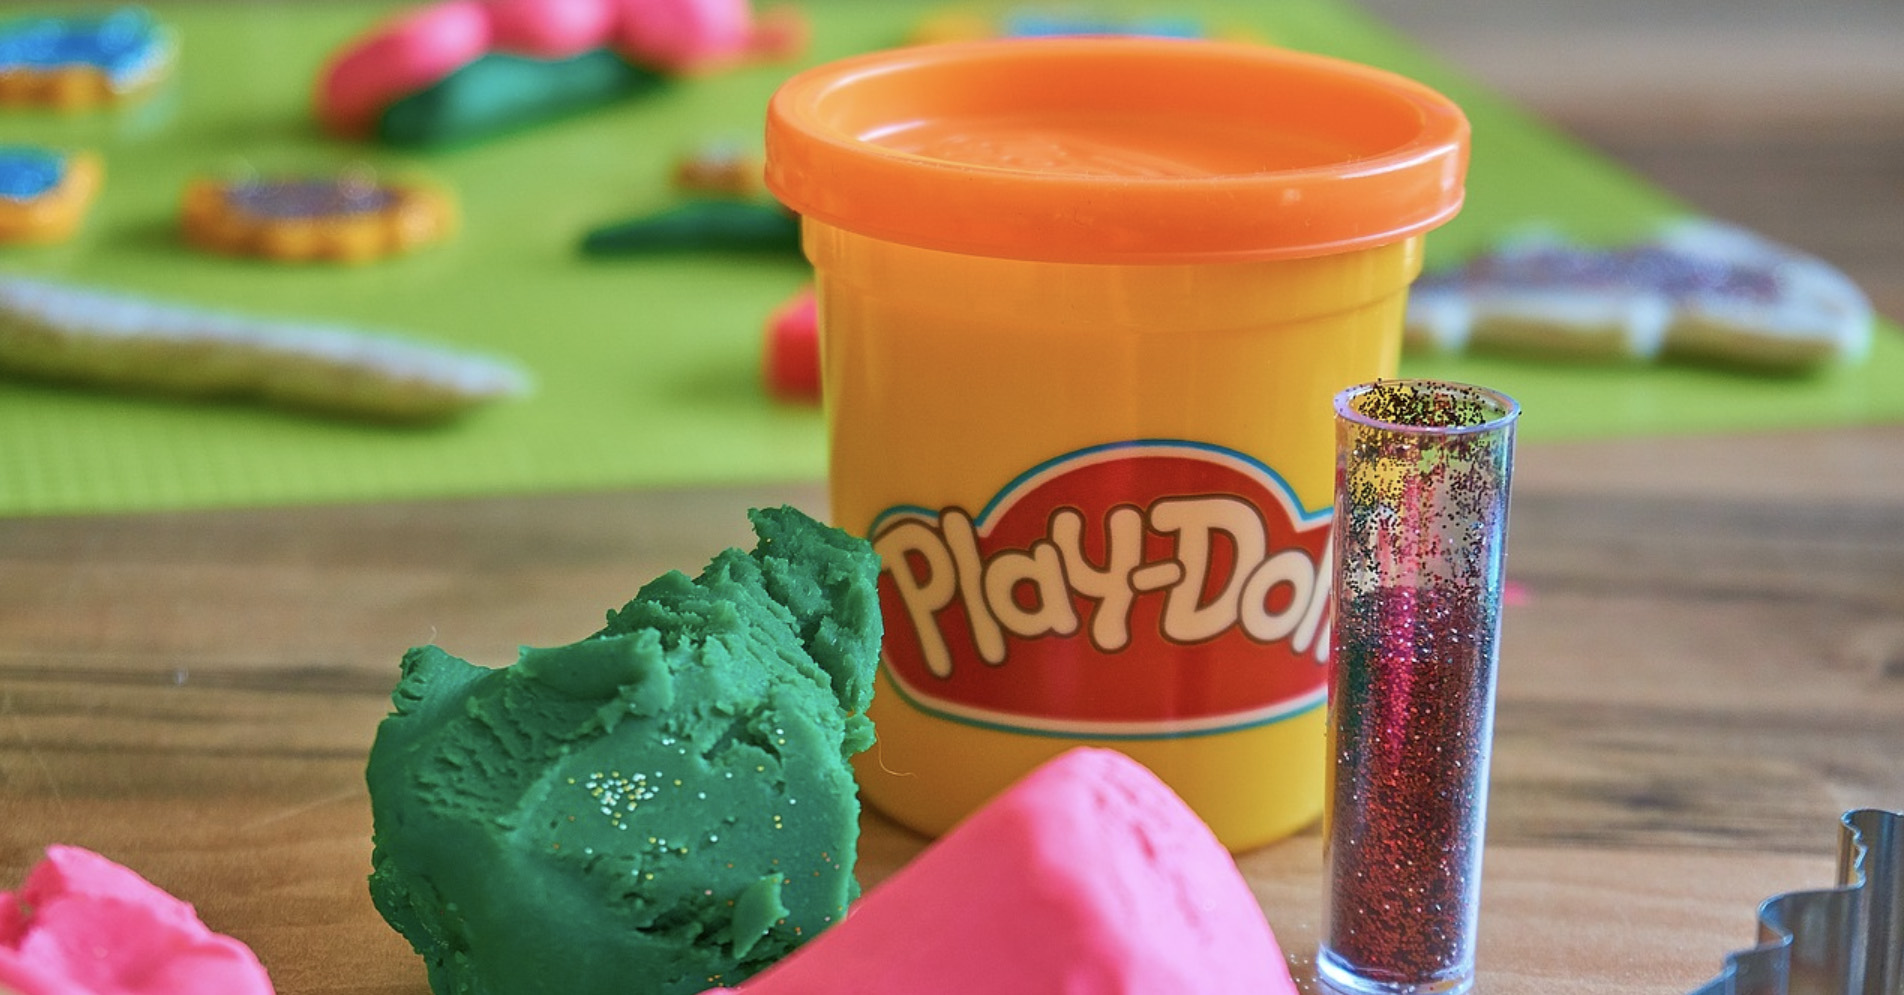 History of Play-Doh